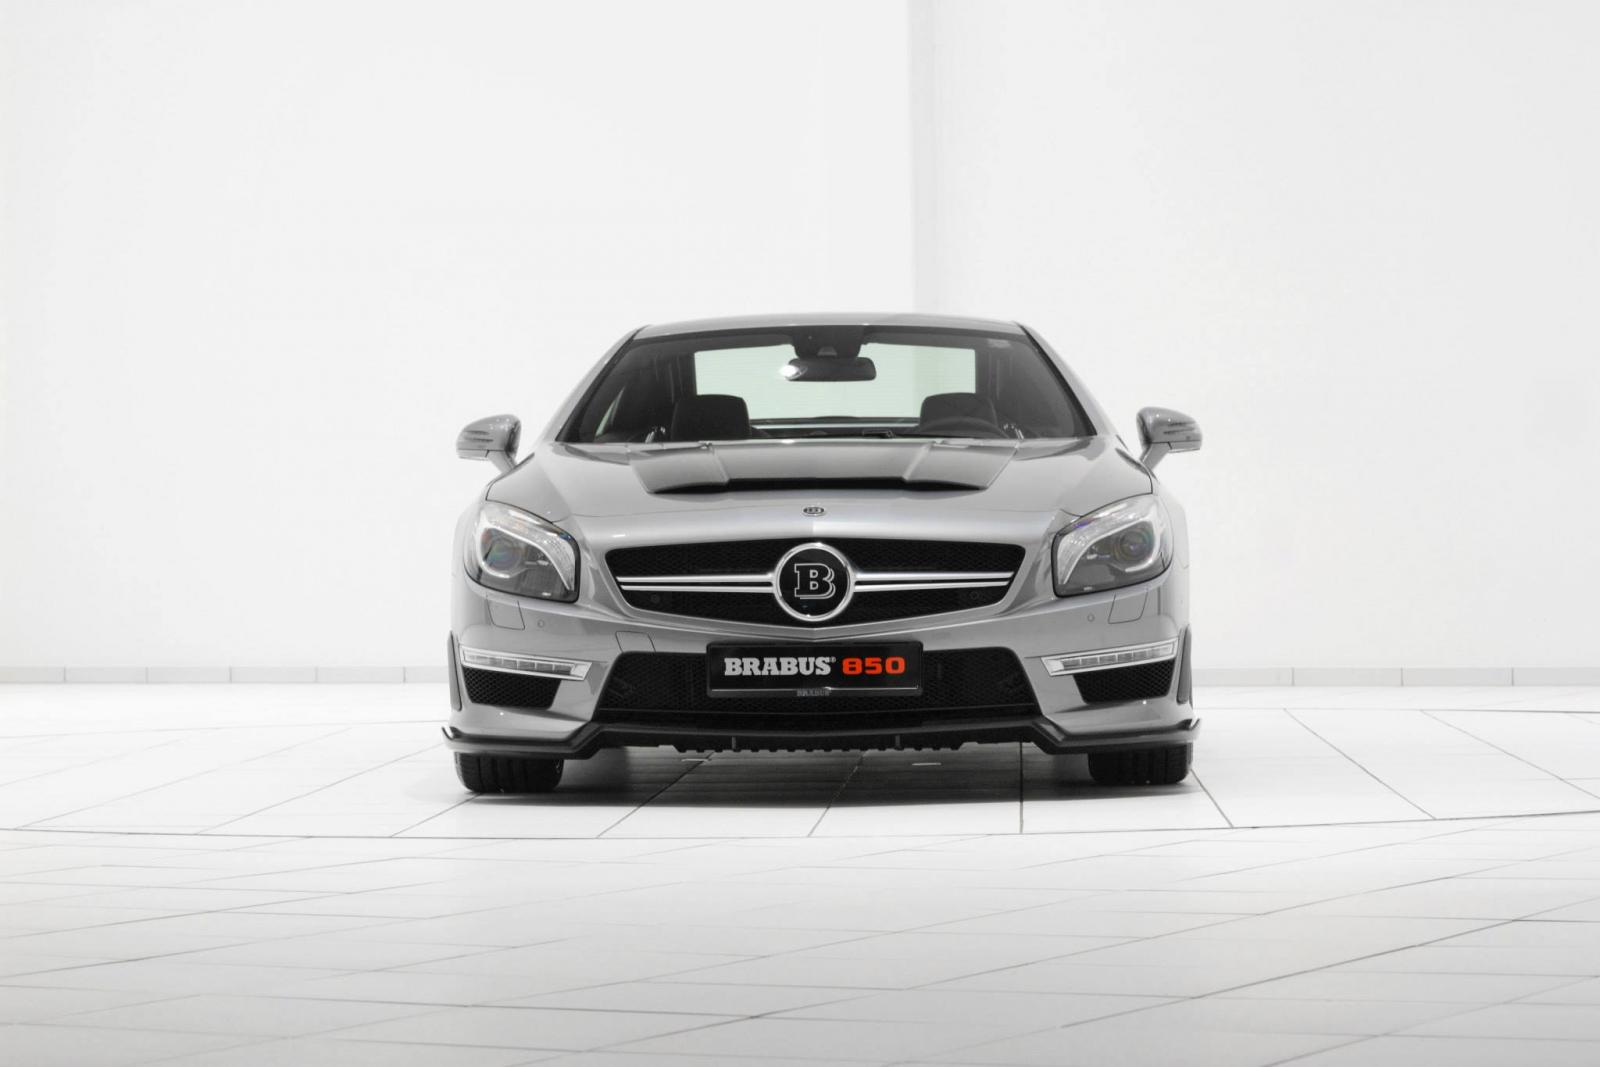 Upgrade of SL63 AMG from Mercedes to 850 hp by Brabus